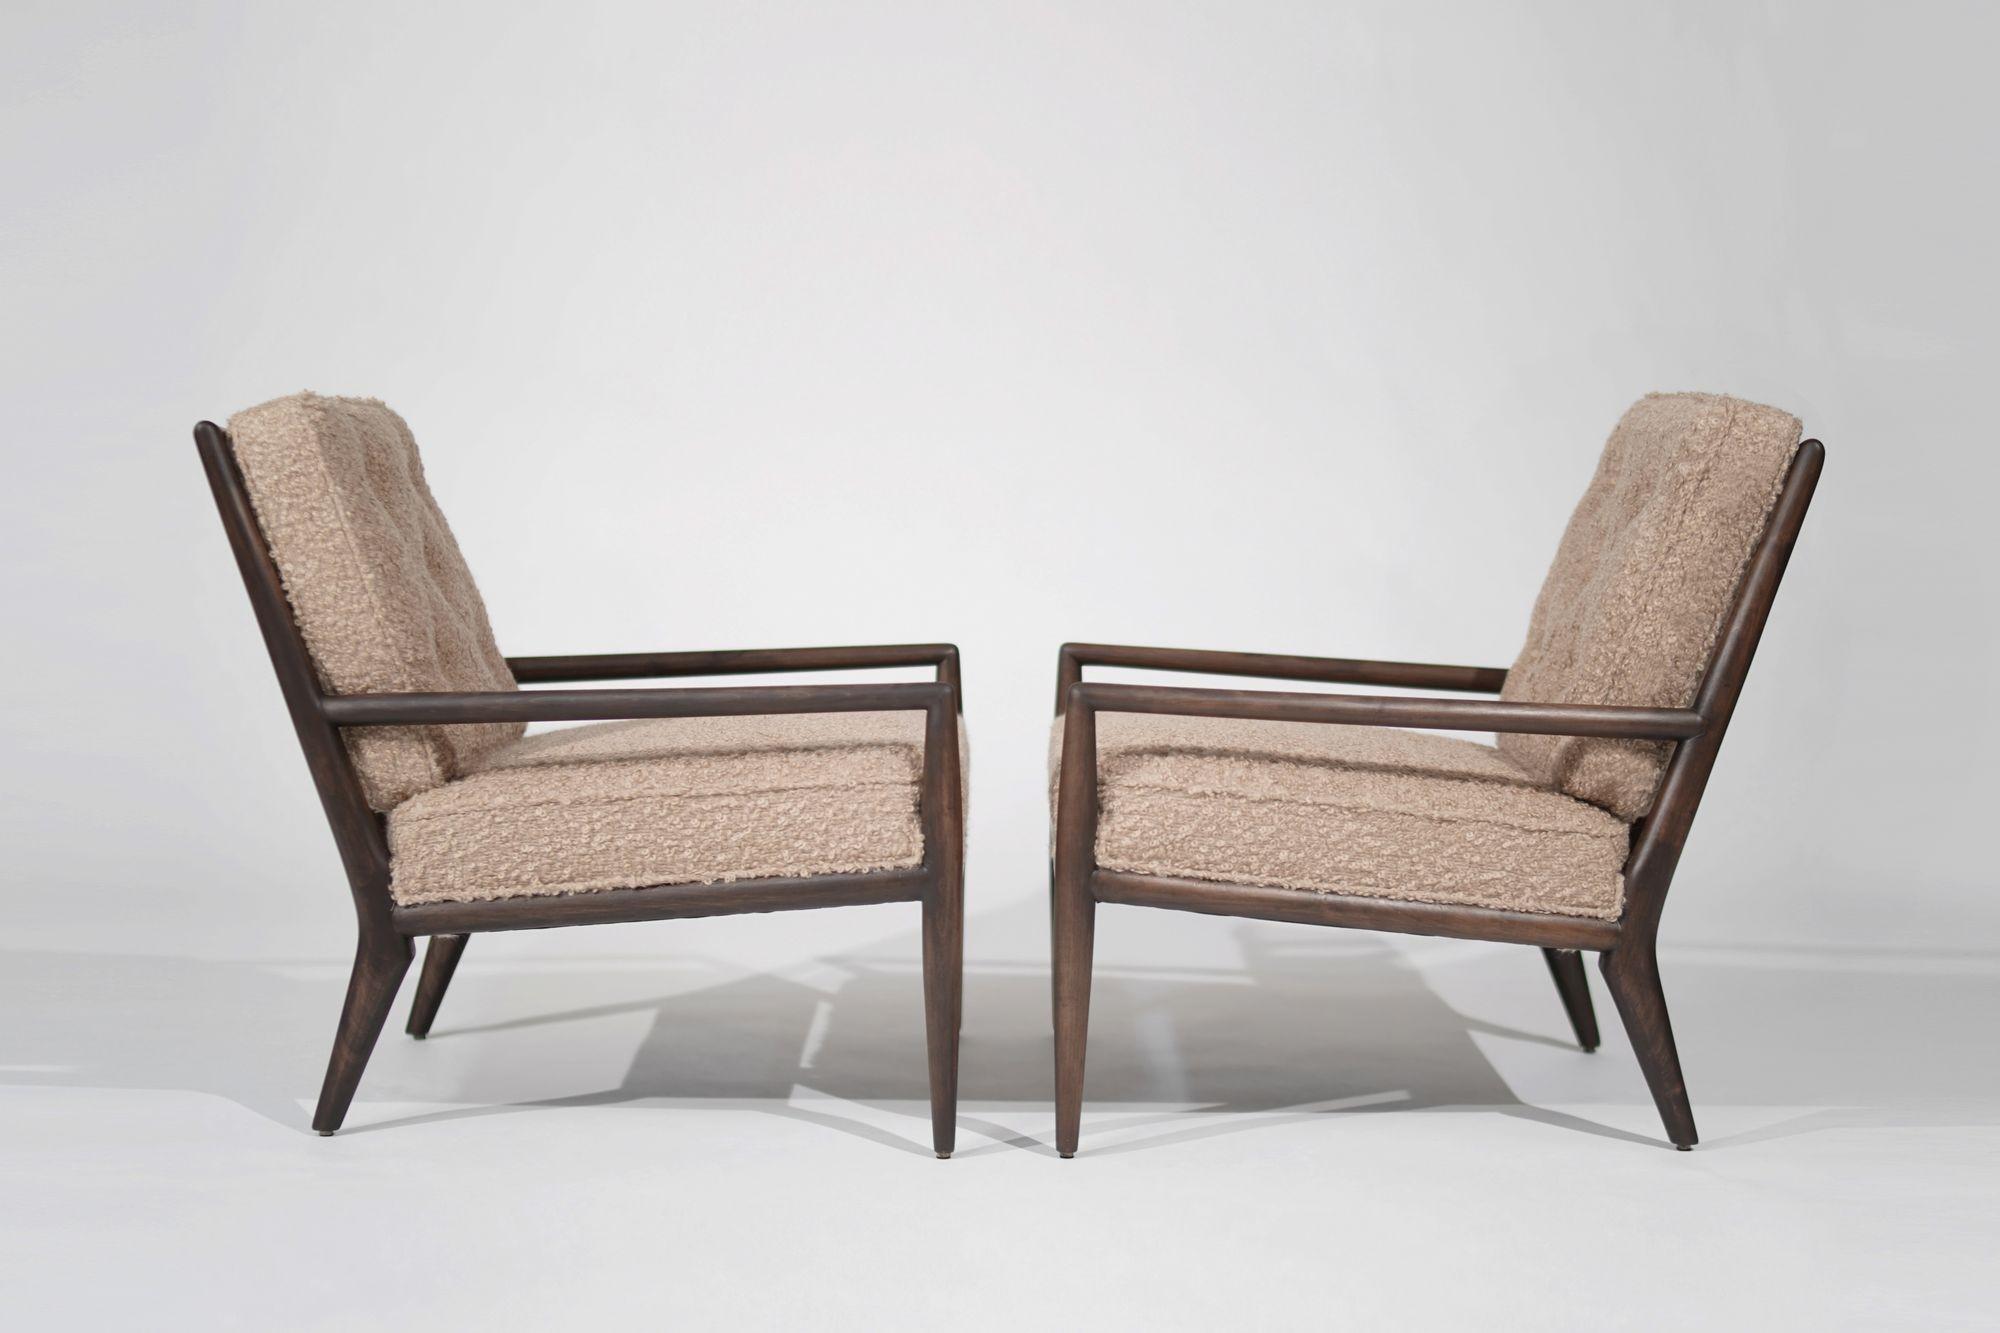 Experience the timeless elegance of Mid-Century Modern design with this exquisite set of lounge chairs, designed by the renowned T.H. Robsjohn-Gibbings for Widdicomb. Crafted circa 1950-1959, these chairs showcase the perfect blend of form and